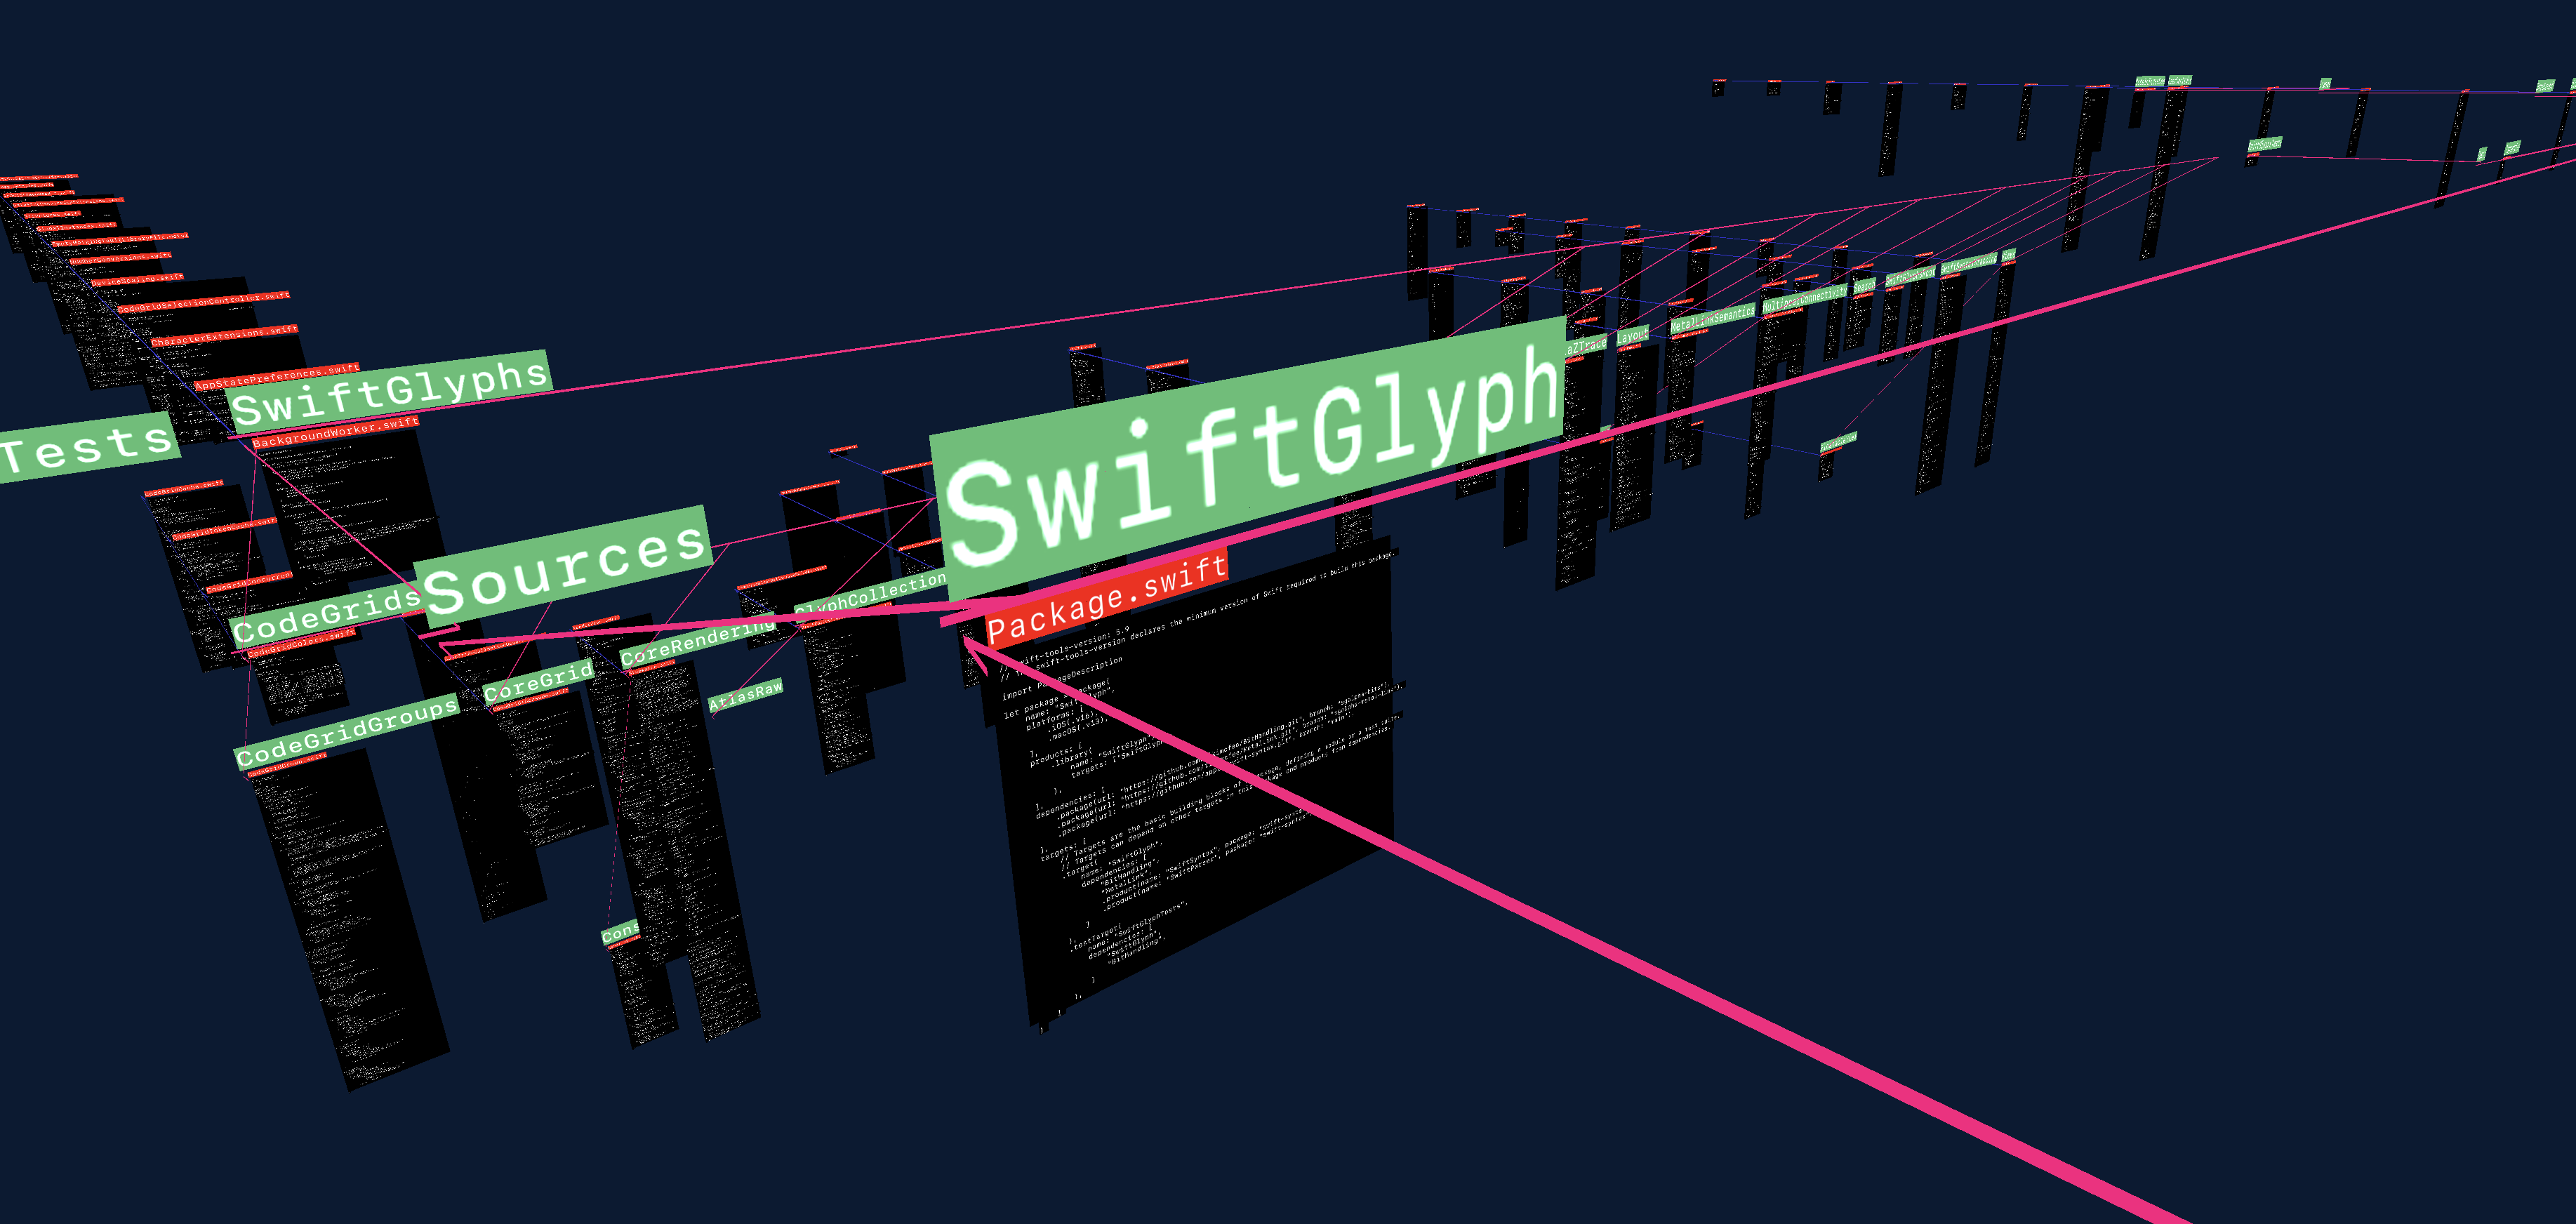 An isometric view of SwiftGlyph rendered in 3D